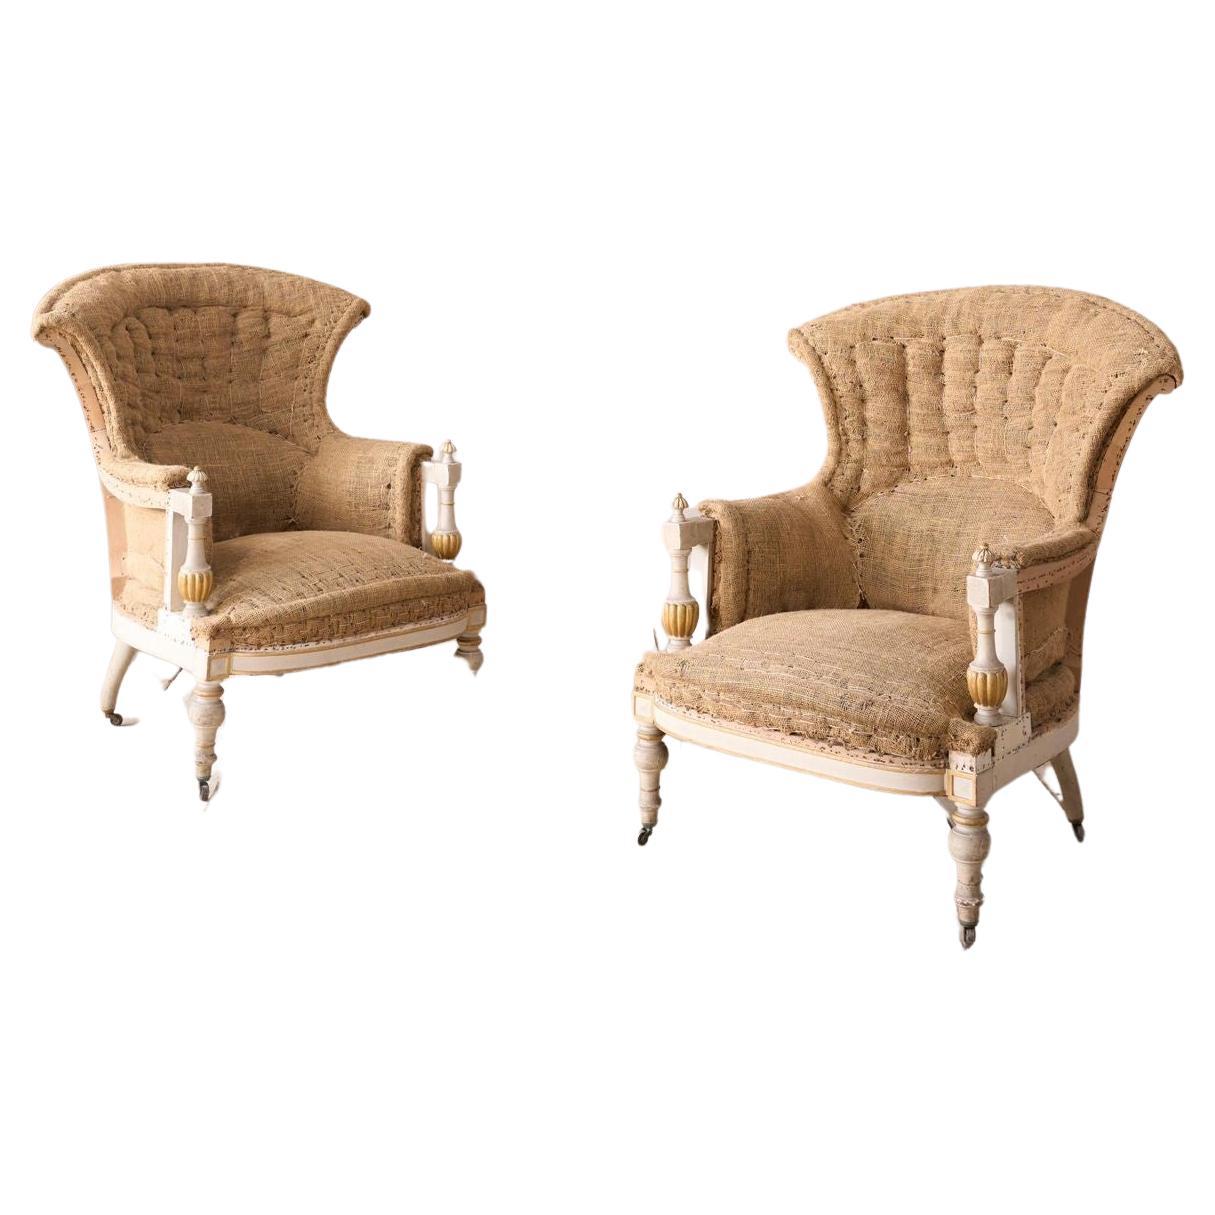 Pair of 19th century Painted fishtail armchairs For Sale